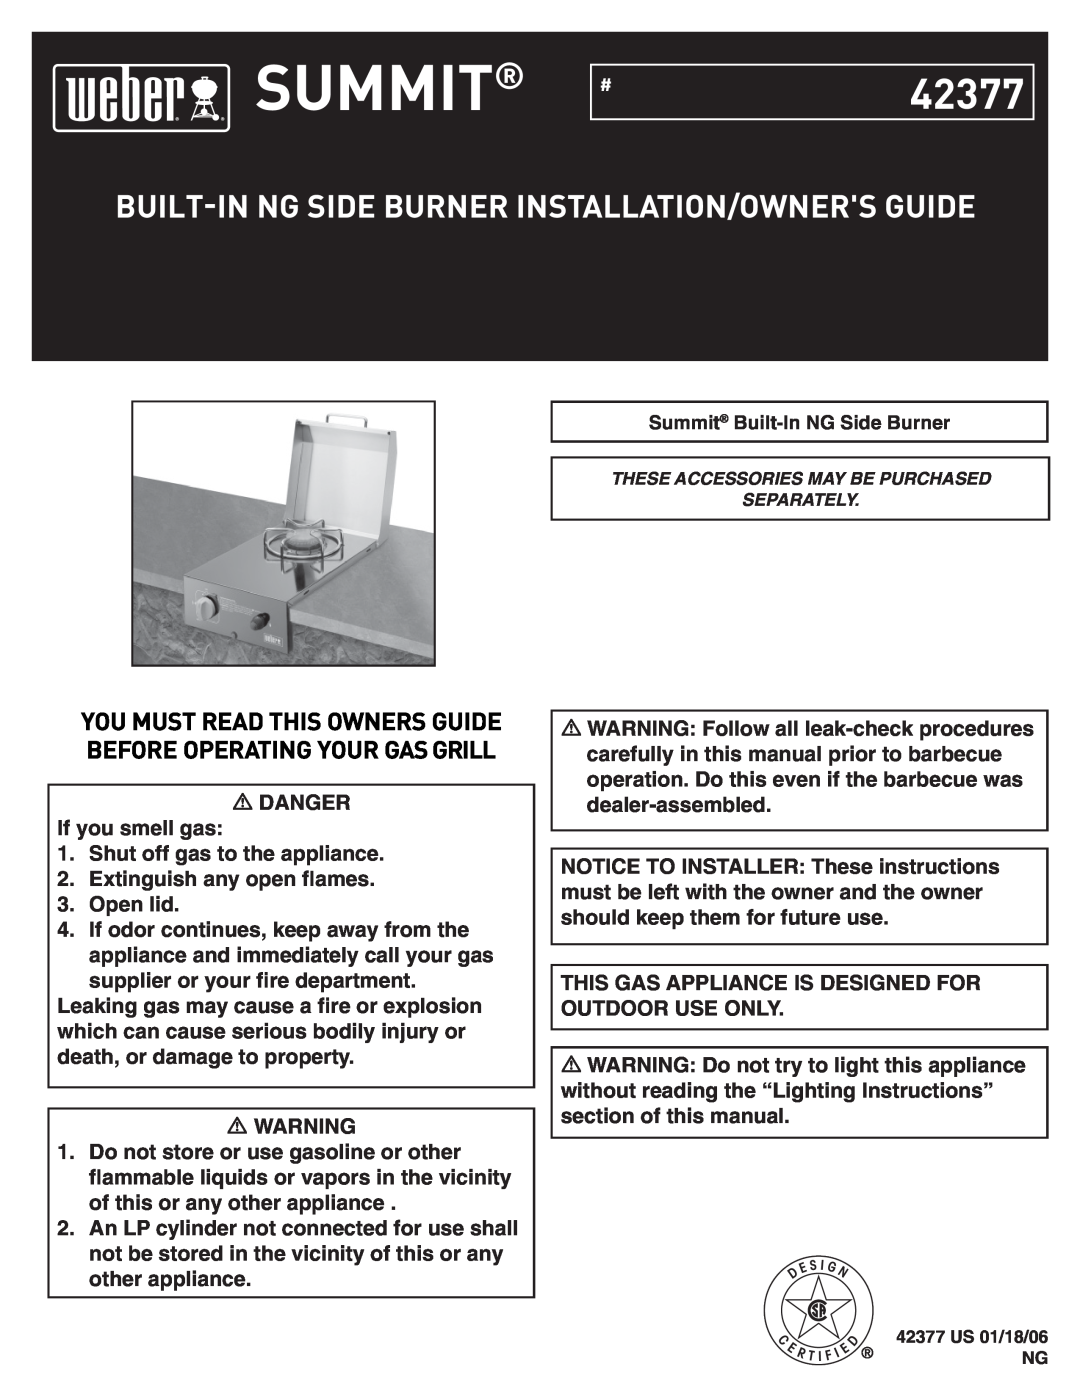 Weber manual Built-Inng Side Burner Installation/Owners Guide, DANGER If you smell gas, Summit, #42377 